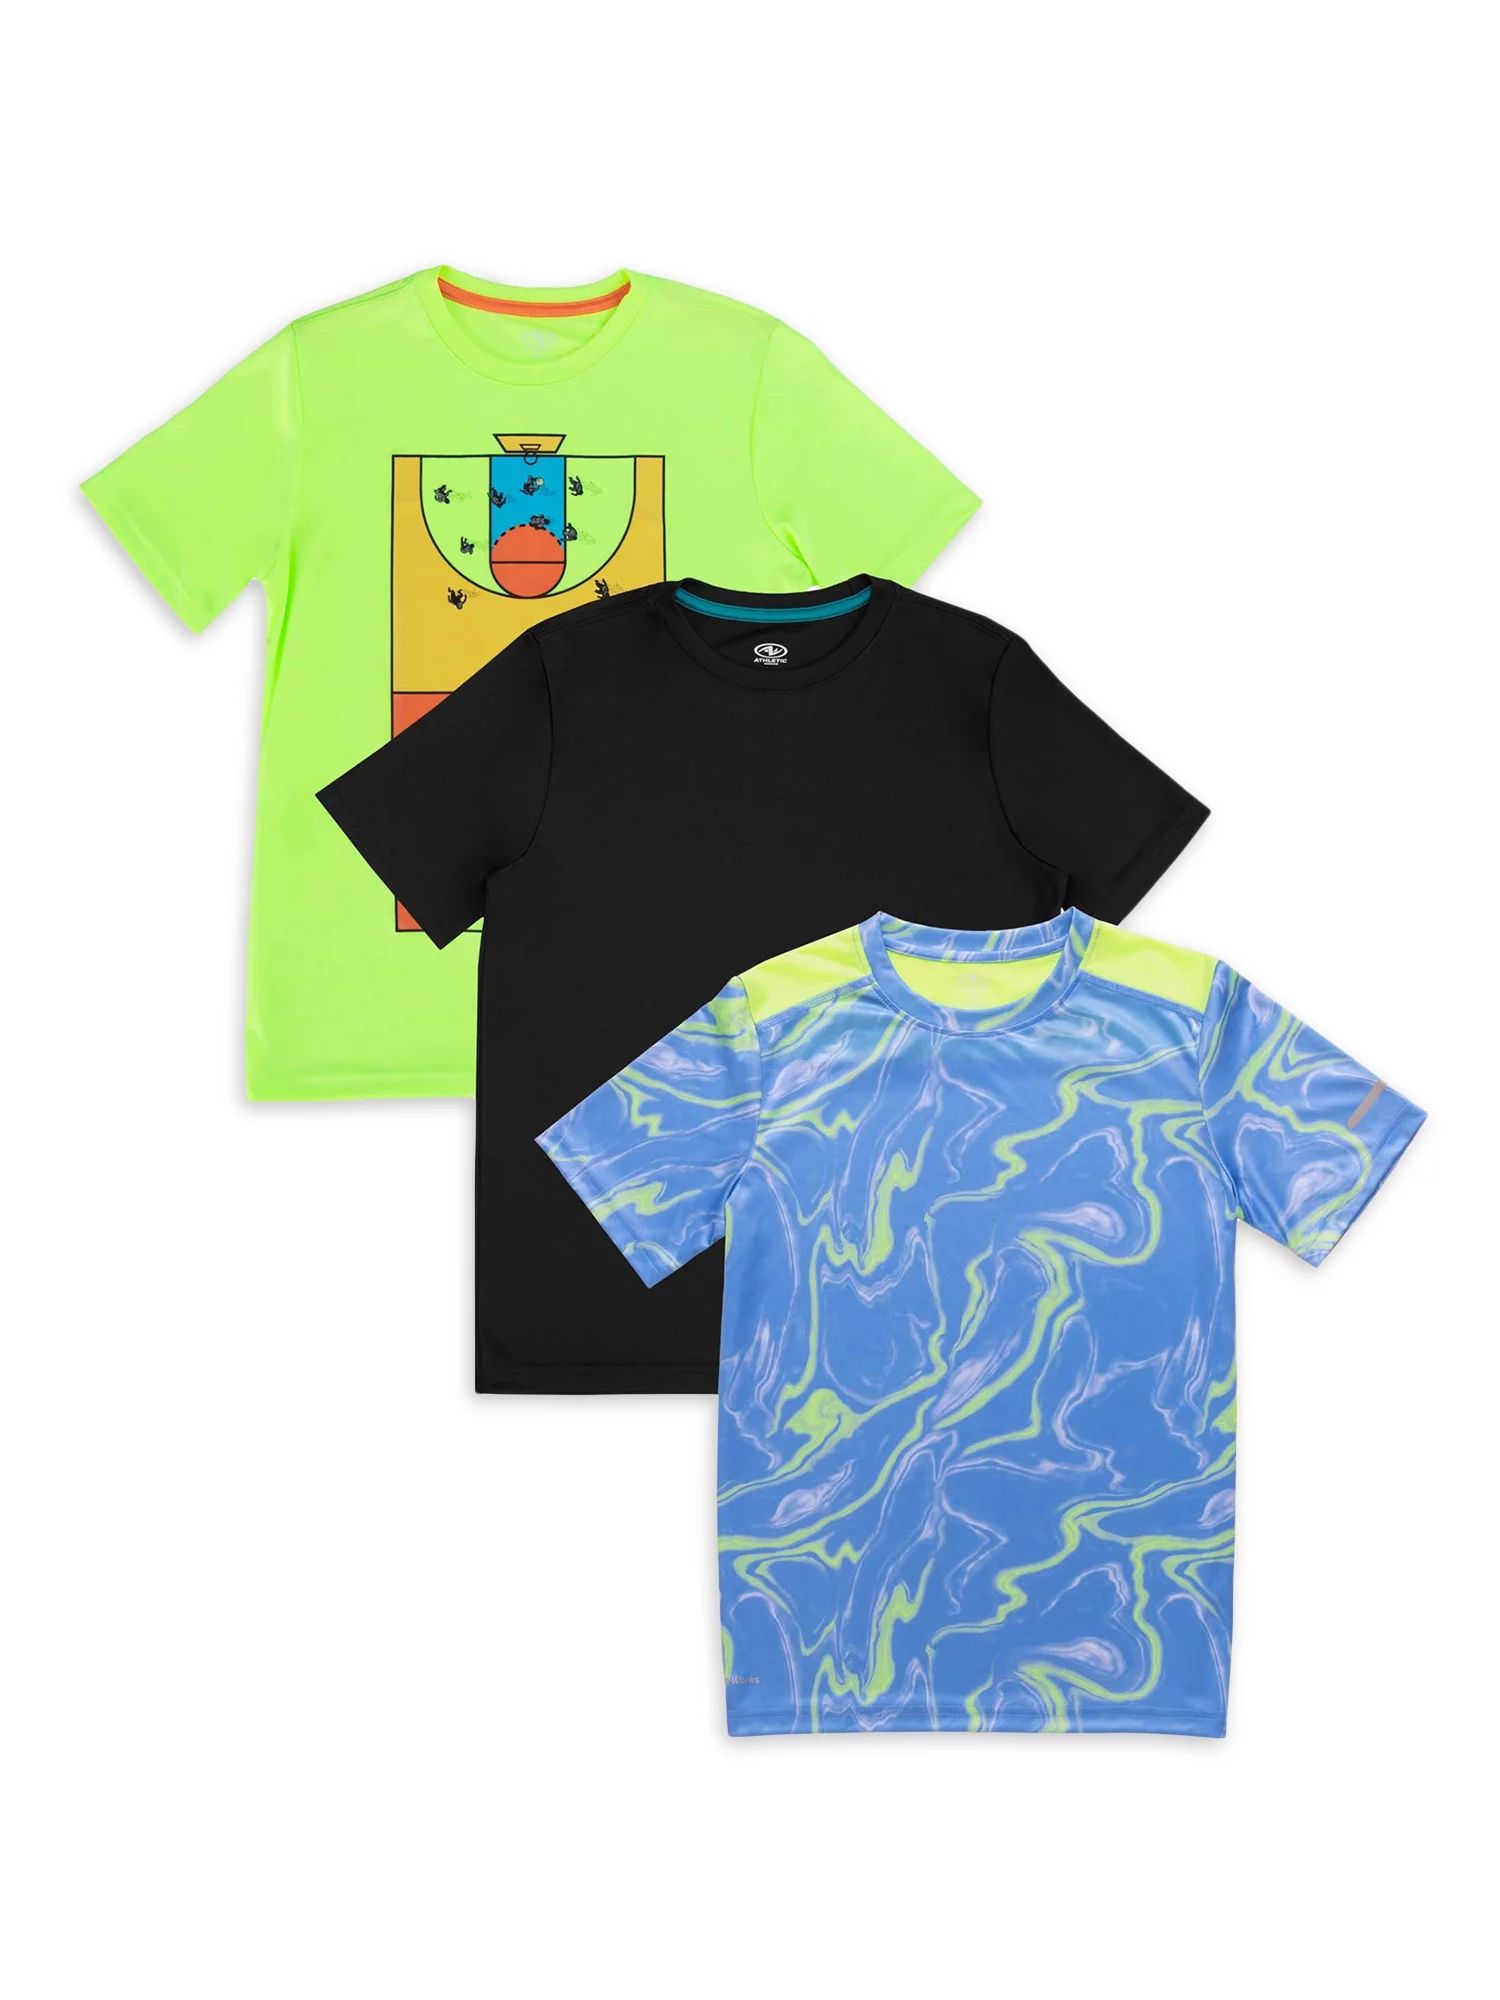 Athletic Works Boys Active Solid & Graphic Short Sleeve T-shirt, 3-Pack, Sizes 4-18 & Husky | Walmart (US)